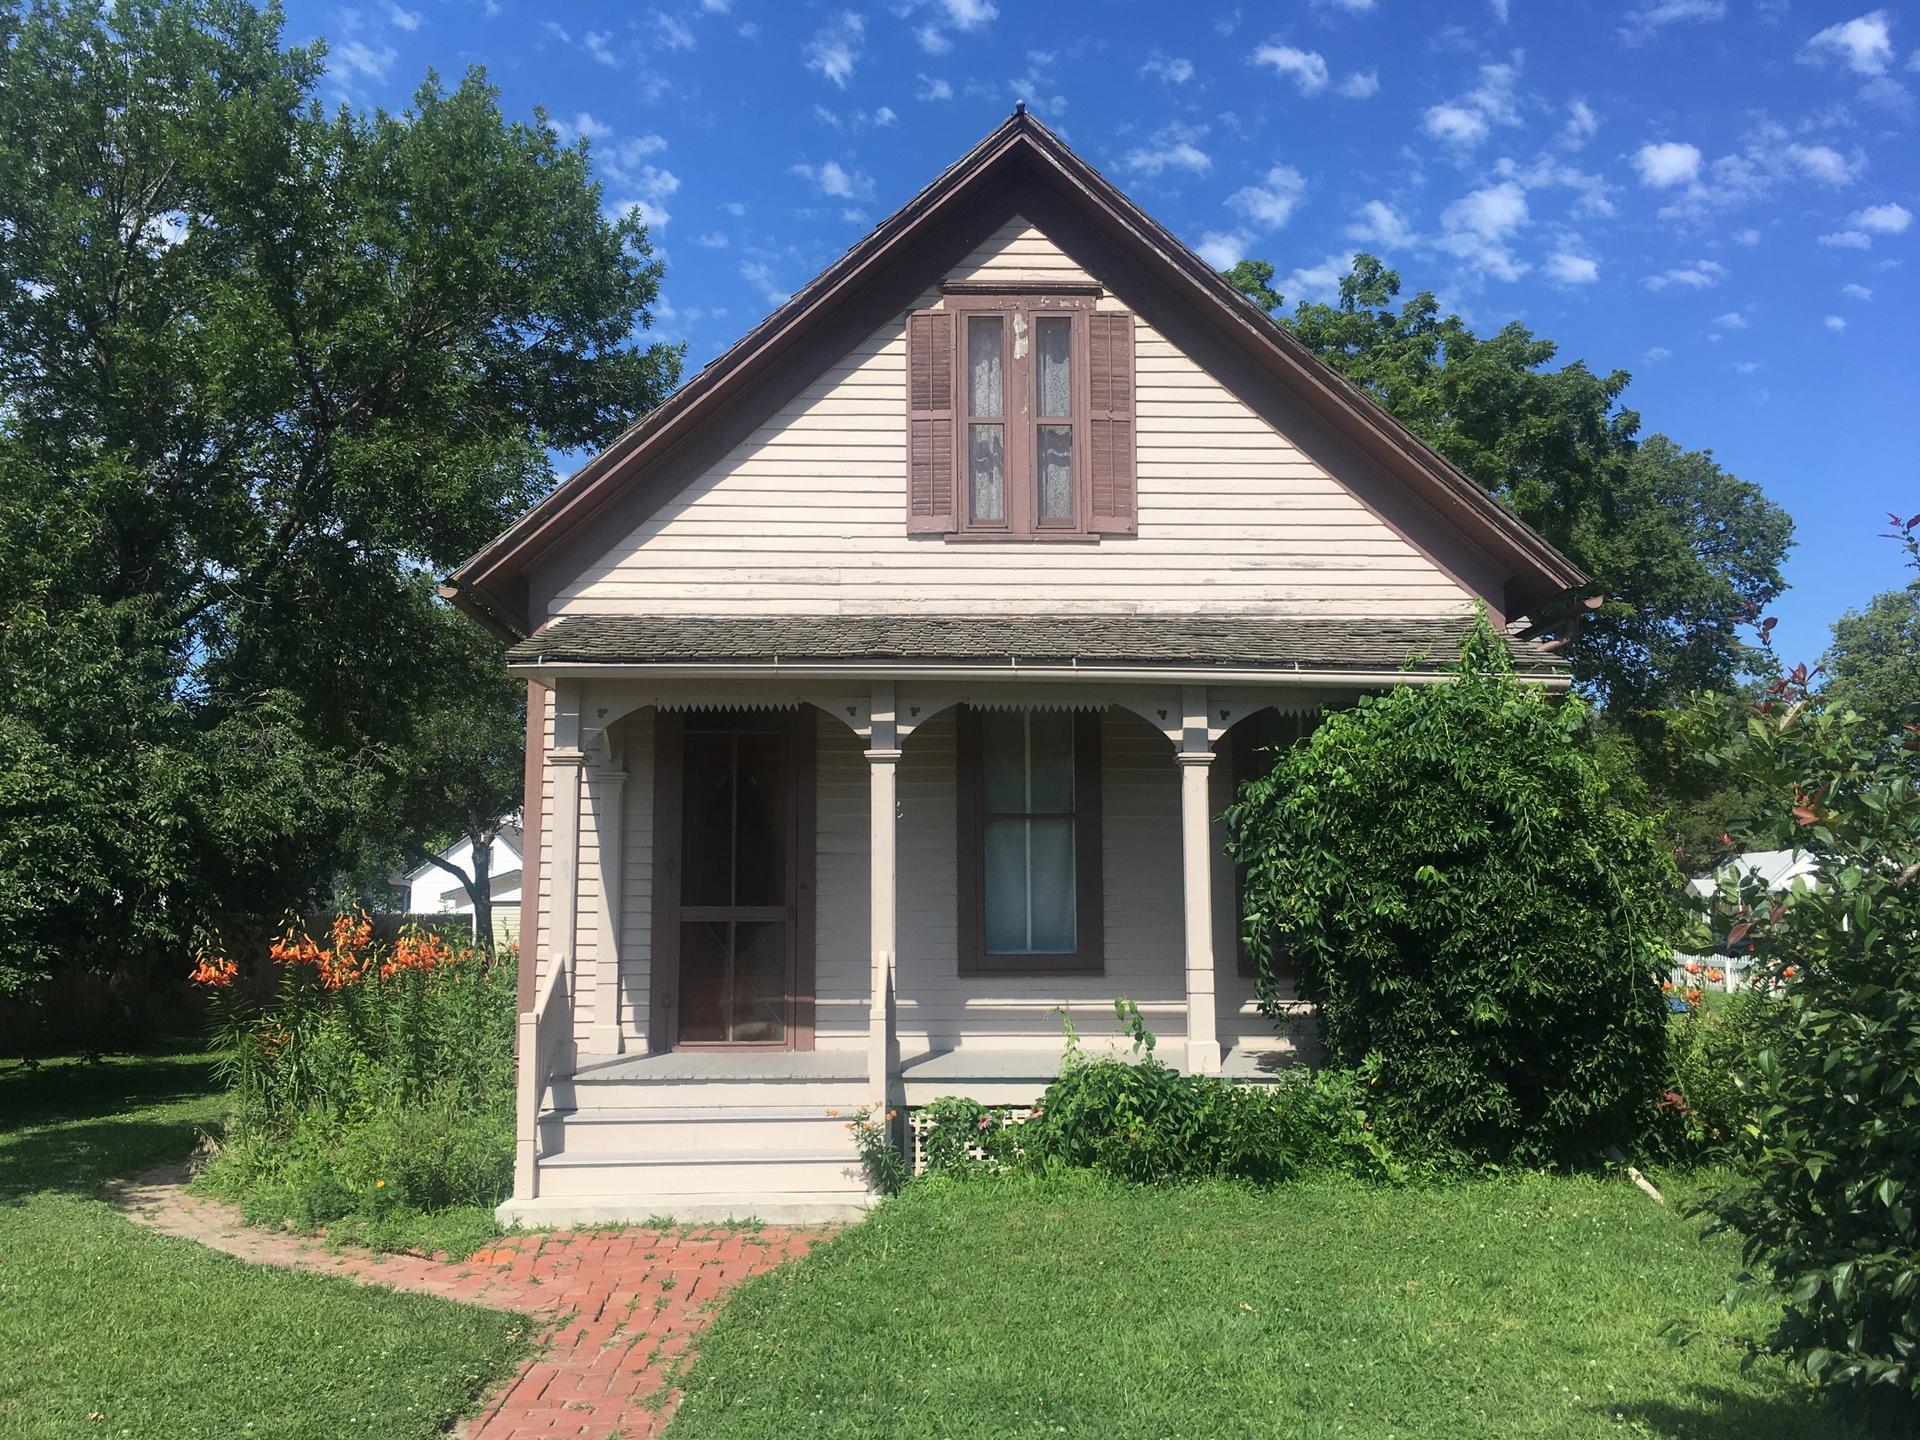 Willa Cather’s childhood home, now the Willa Cather Pioneer Memorial, in Red Cloud, Nebraska.